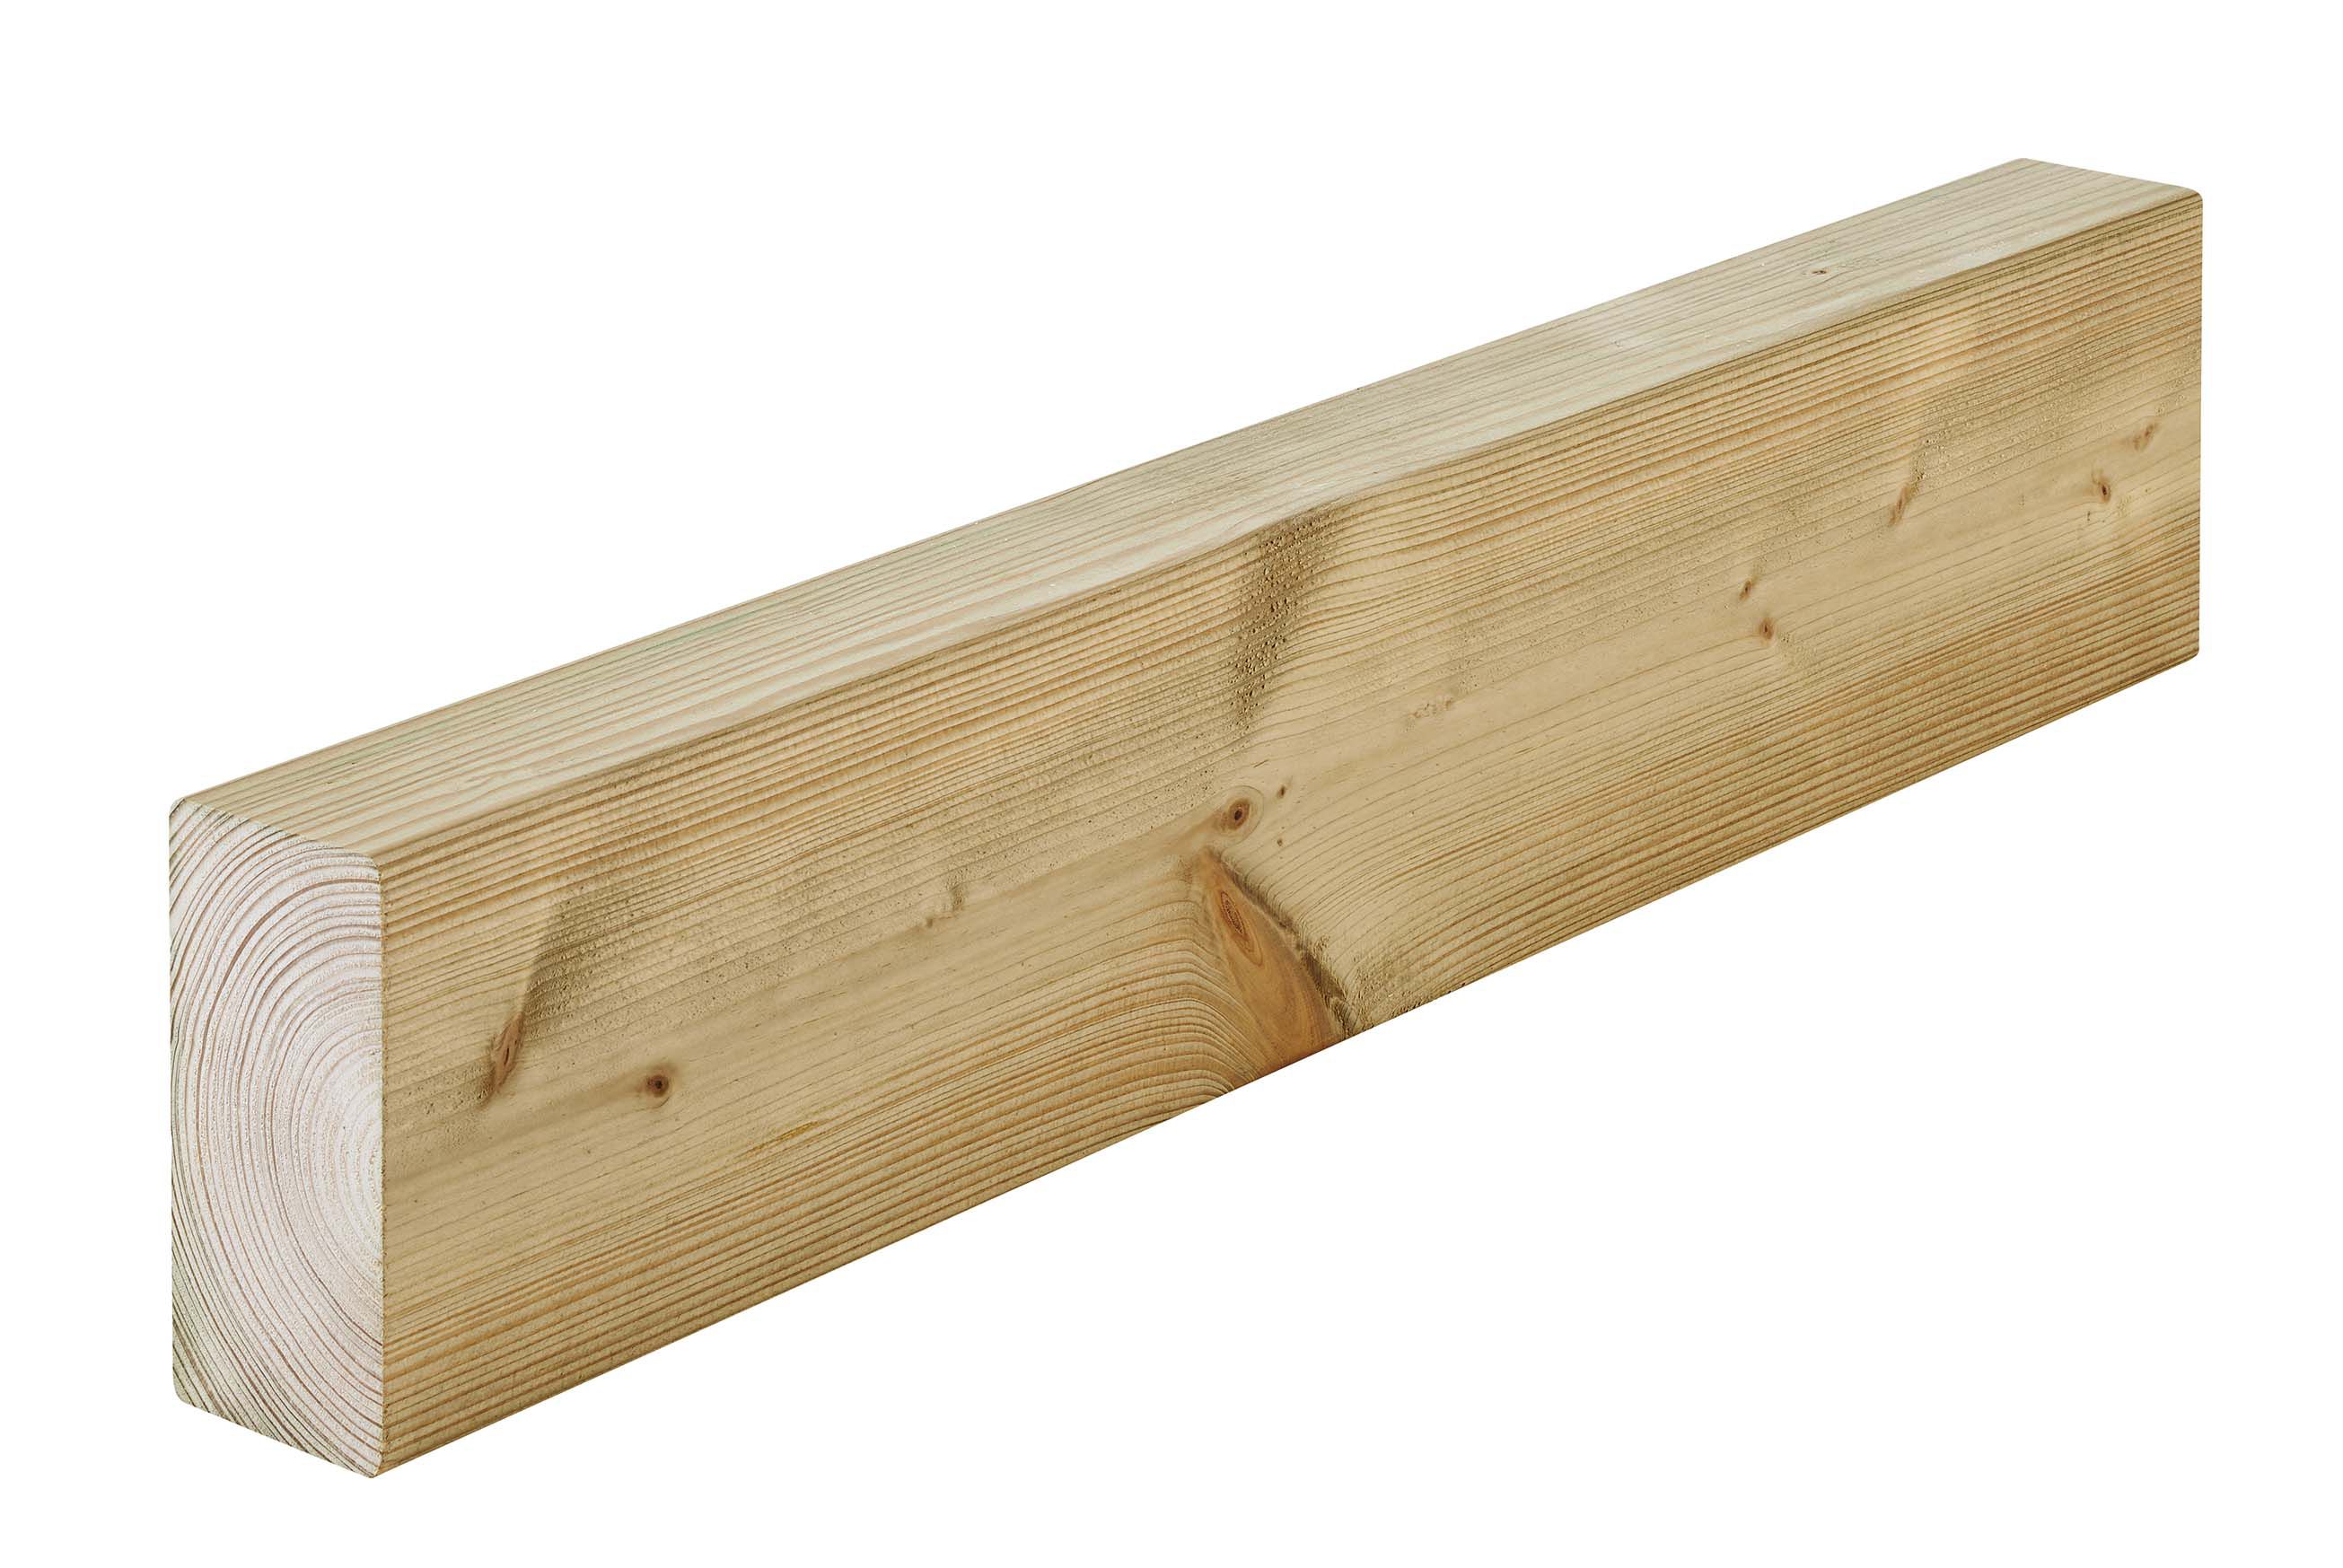 Treated Smooth Planed Round edge Treated Carcassing timber (L)2.4m (W)95mm (T)45mm, Pack of 4